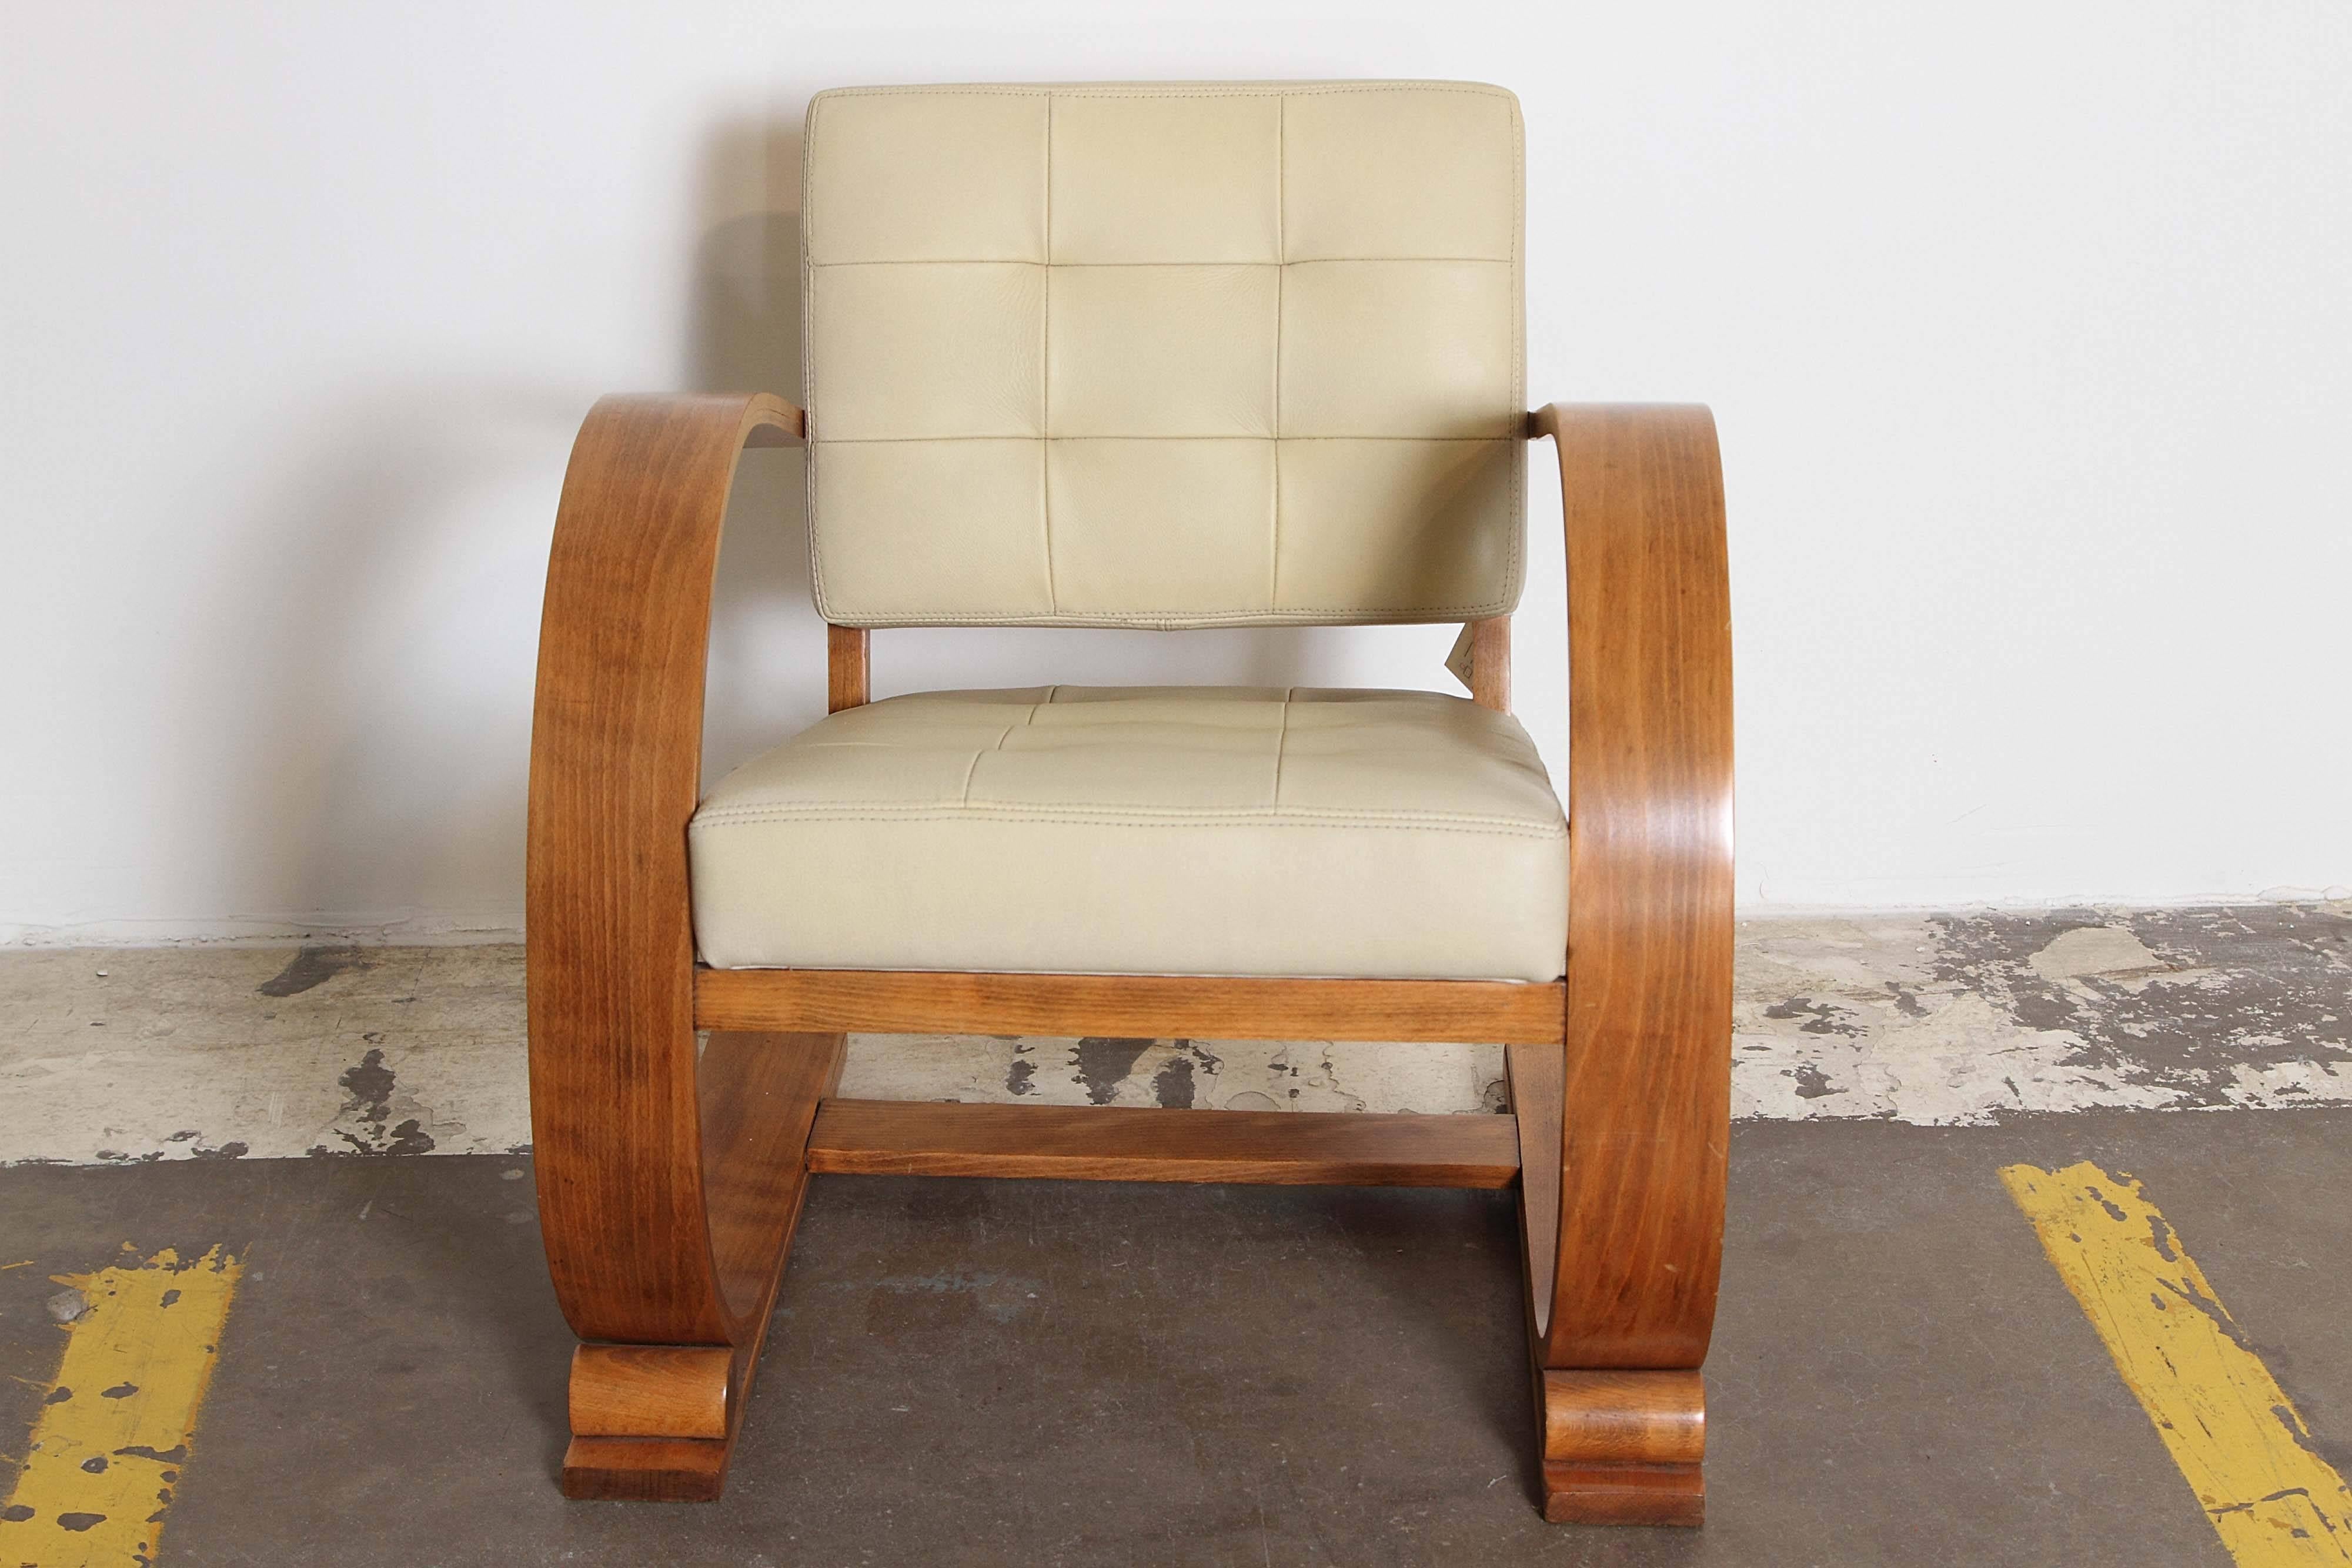 Streamline Art Deco Cantilevered Bentwood Modernist Lounge Chair

Appealing and comfortable Art Deco style lounger, with steam-bent laminated wood, similar to various vintage European designs.  Manner of Russel Wright   Russell  Bauhaus Rohde  KEM